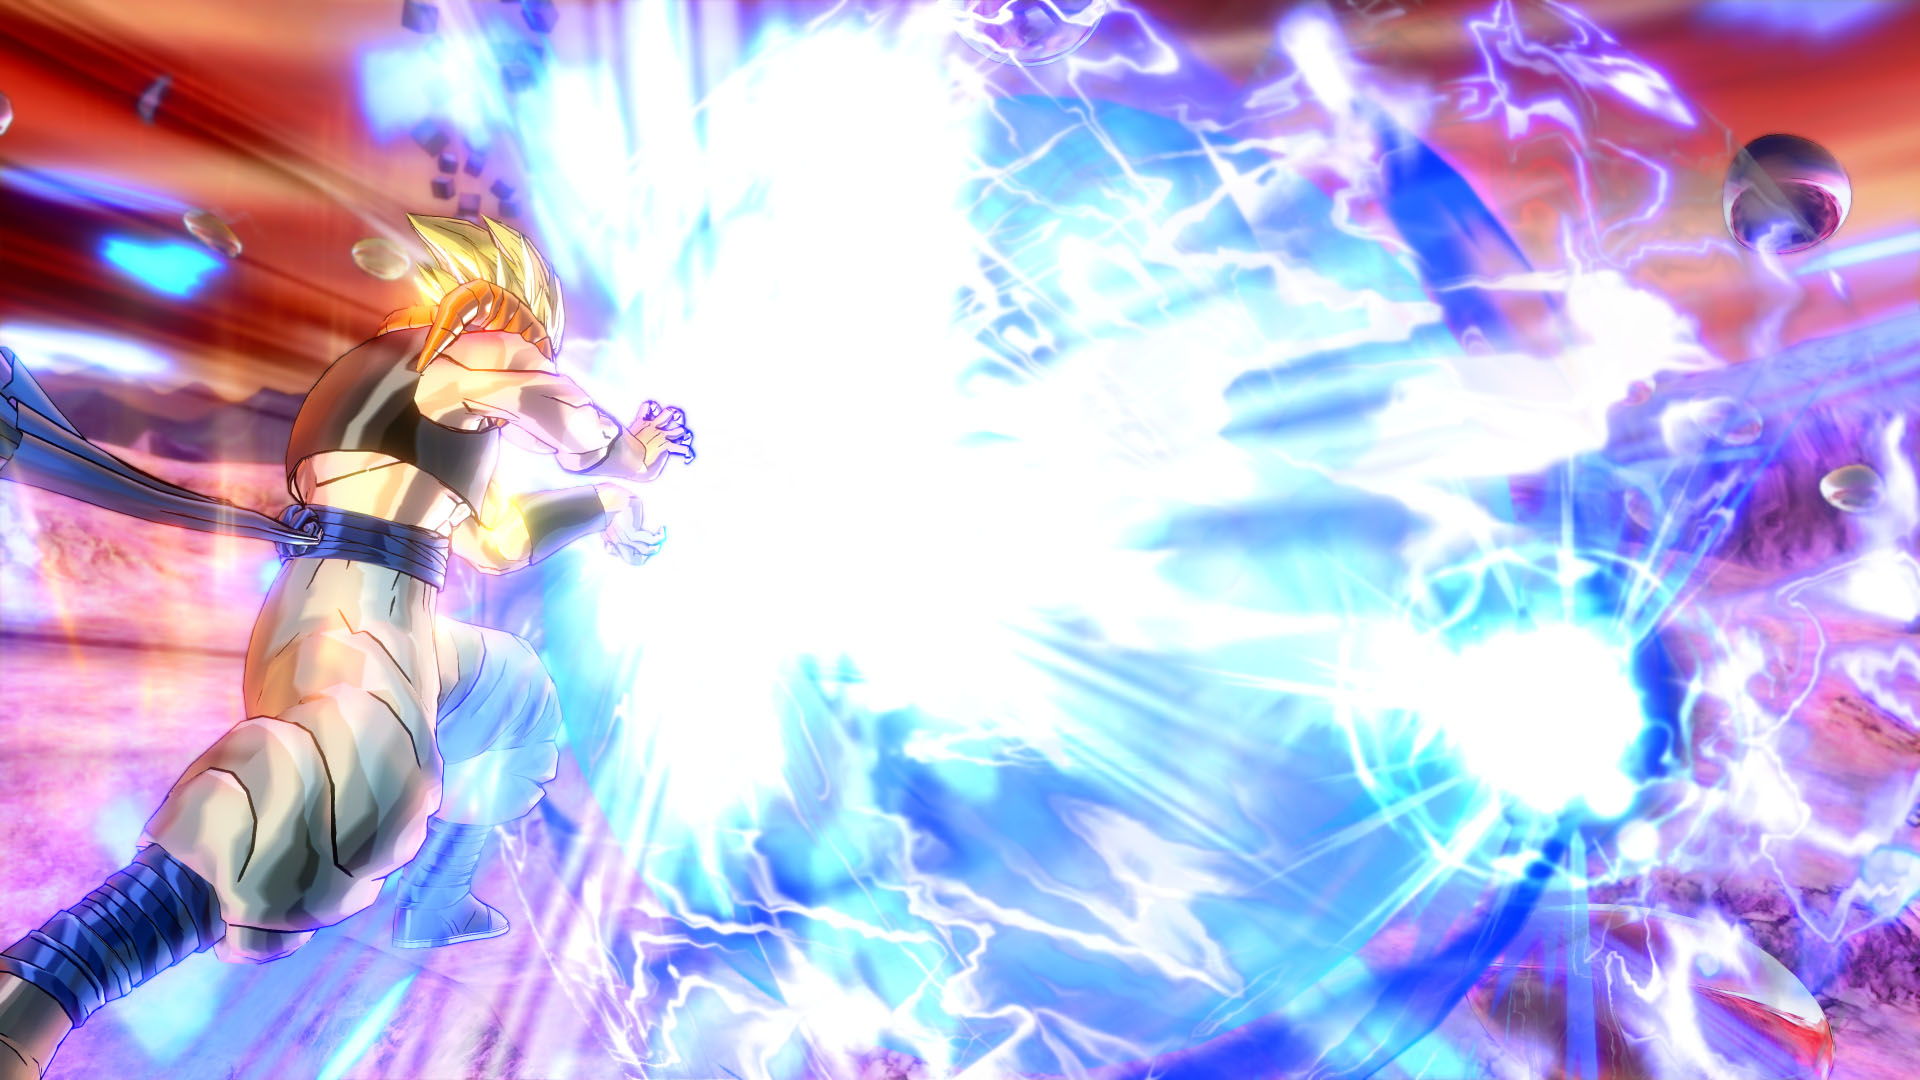  Dragon Ball Xenoverse 2. Image shows two characters shooting huge beams of energy at each other.